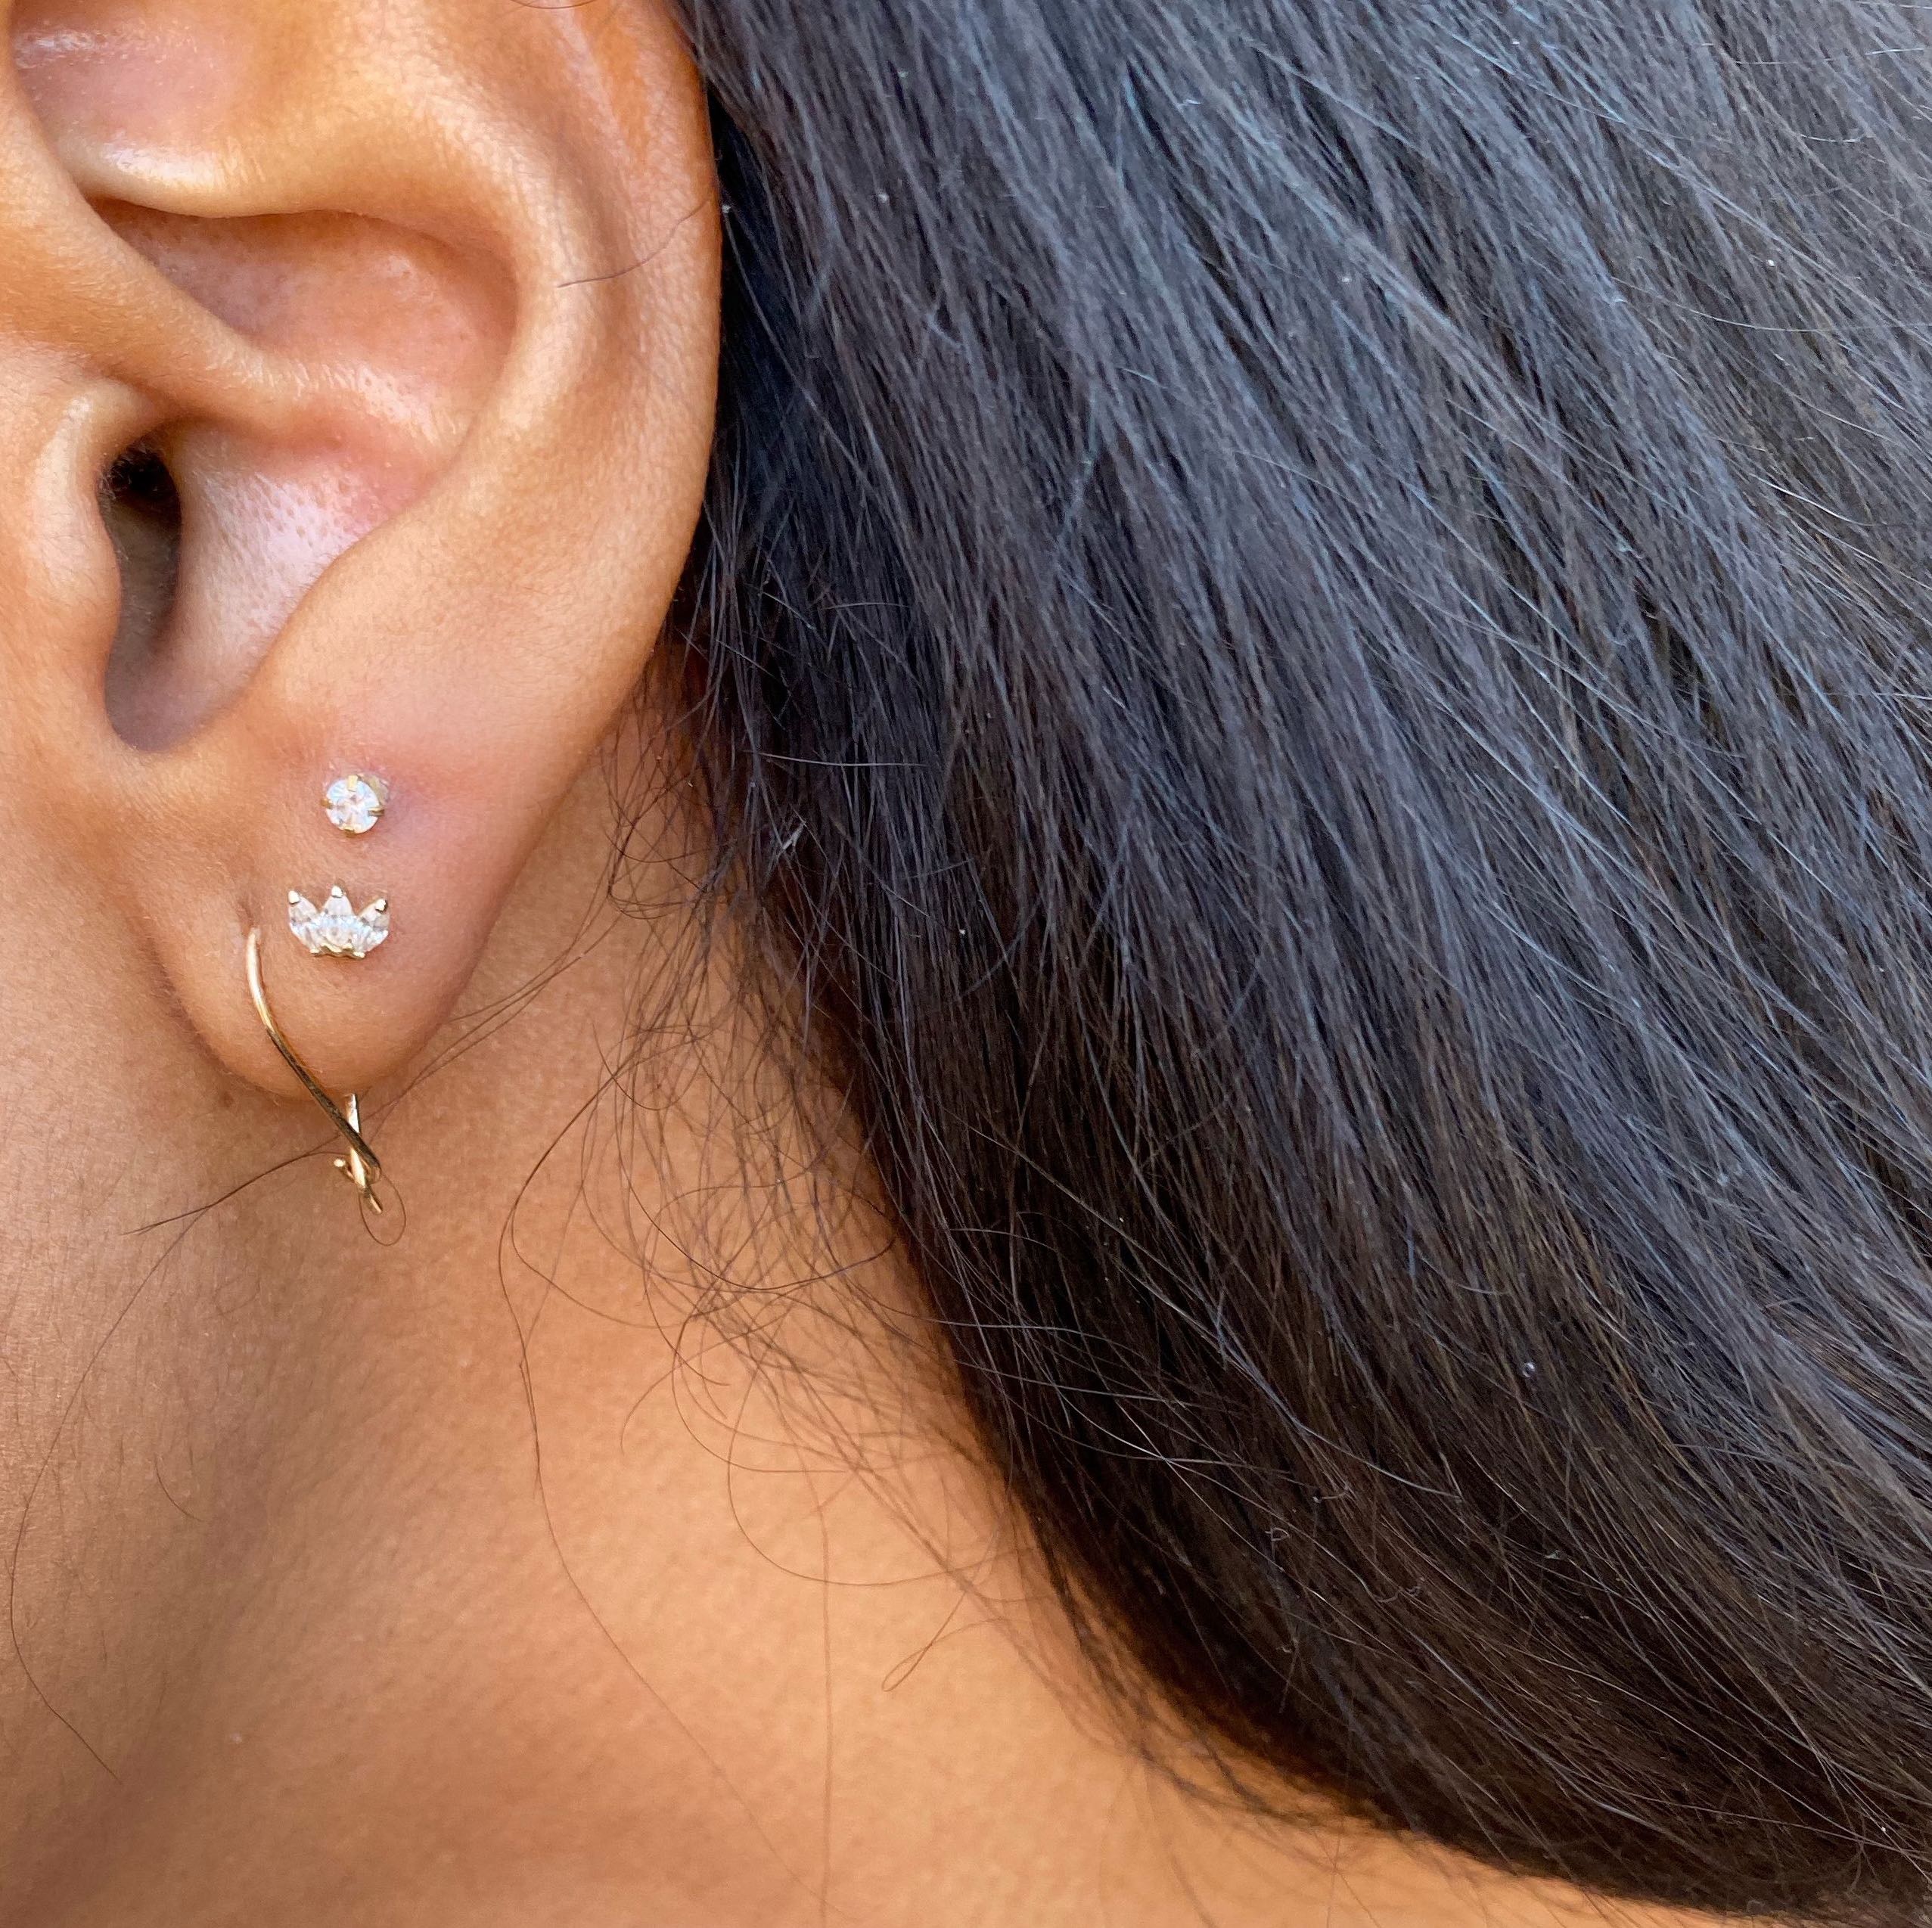 The Prettiest Piercings Start With A 